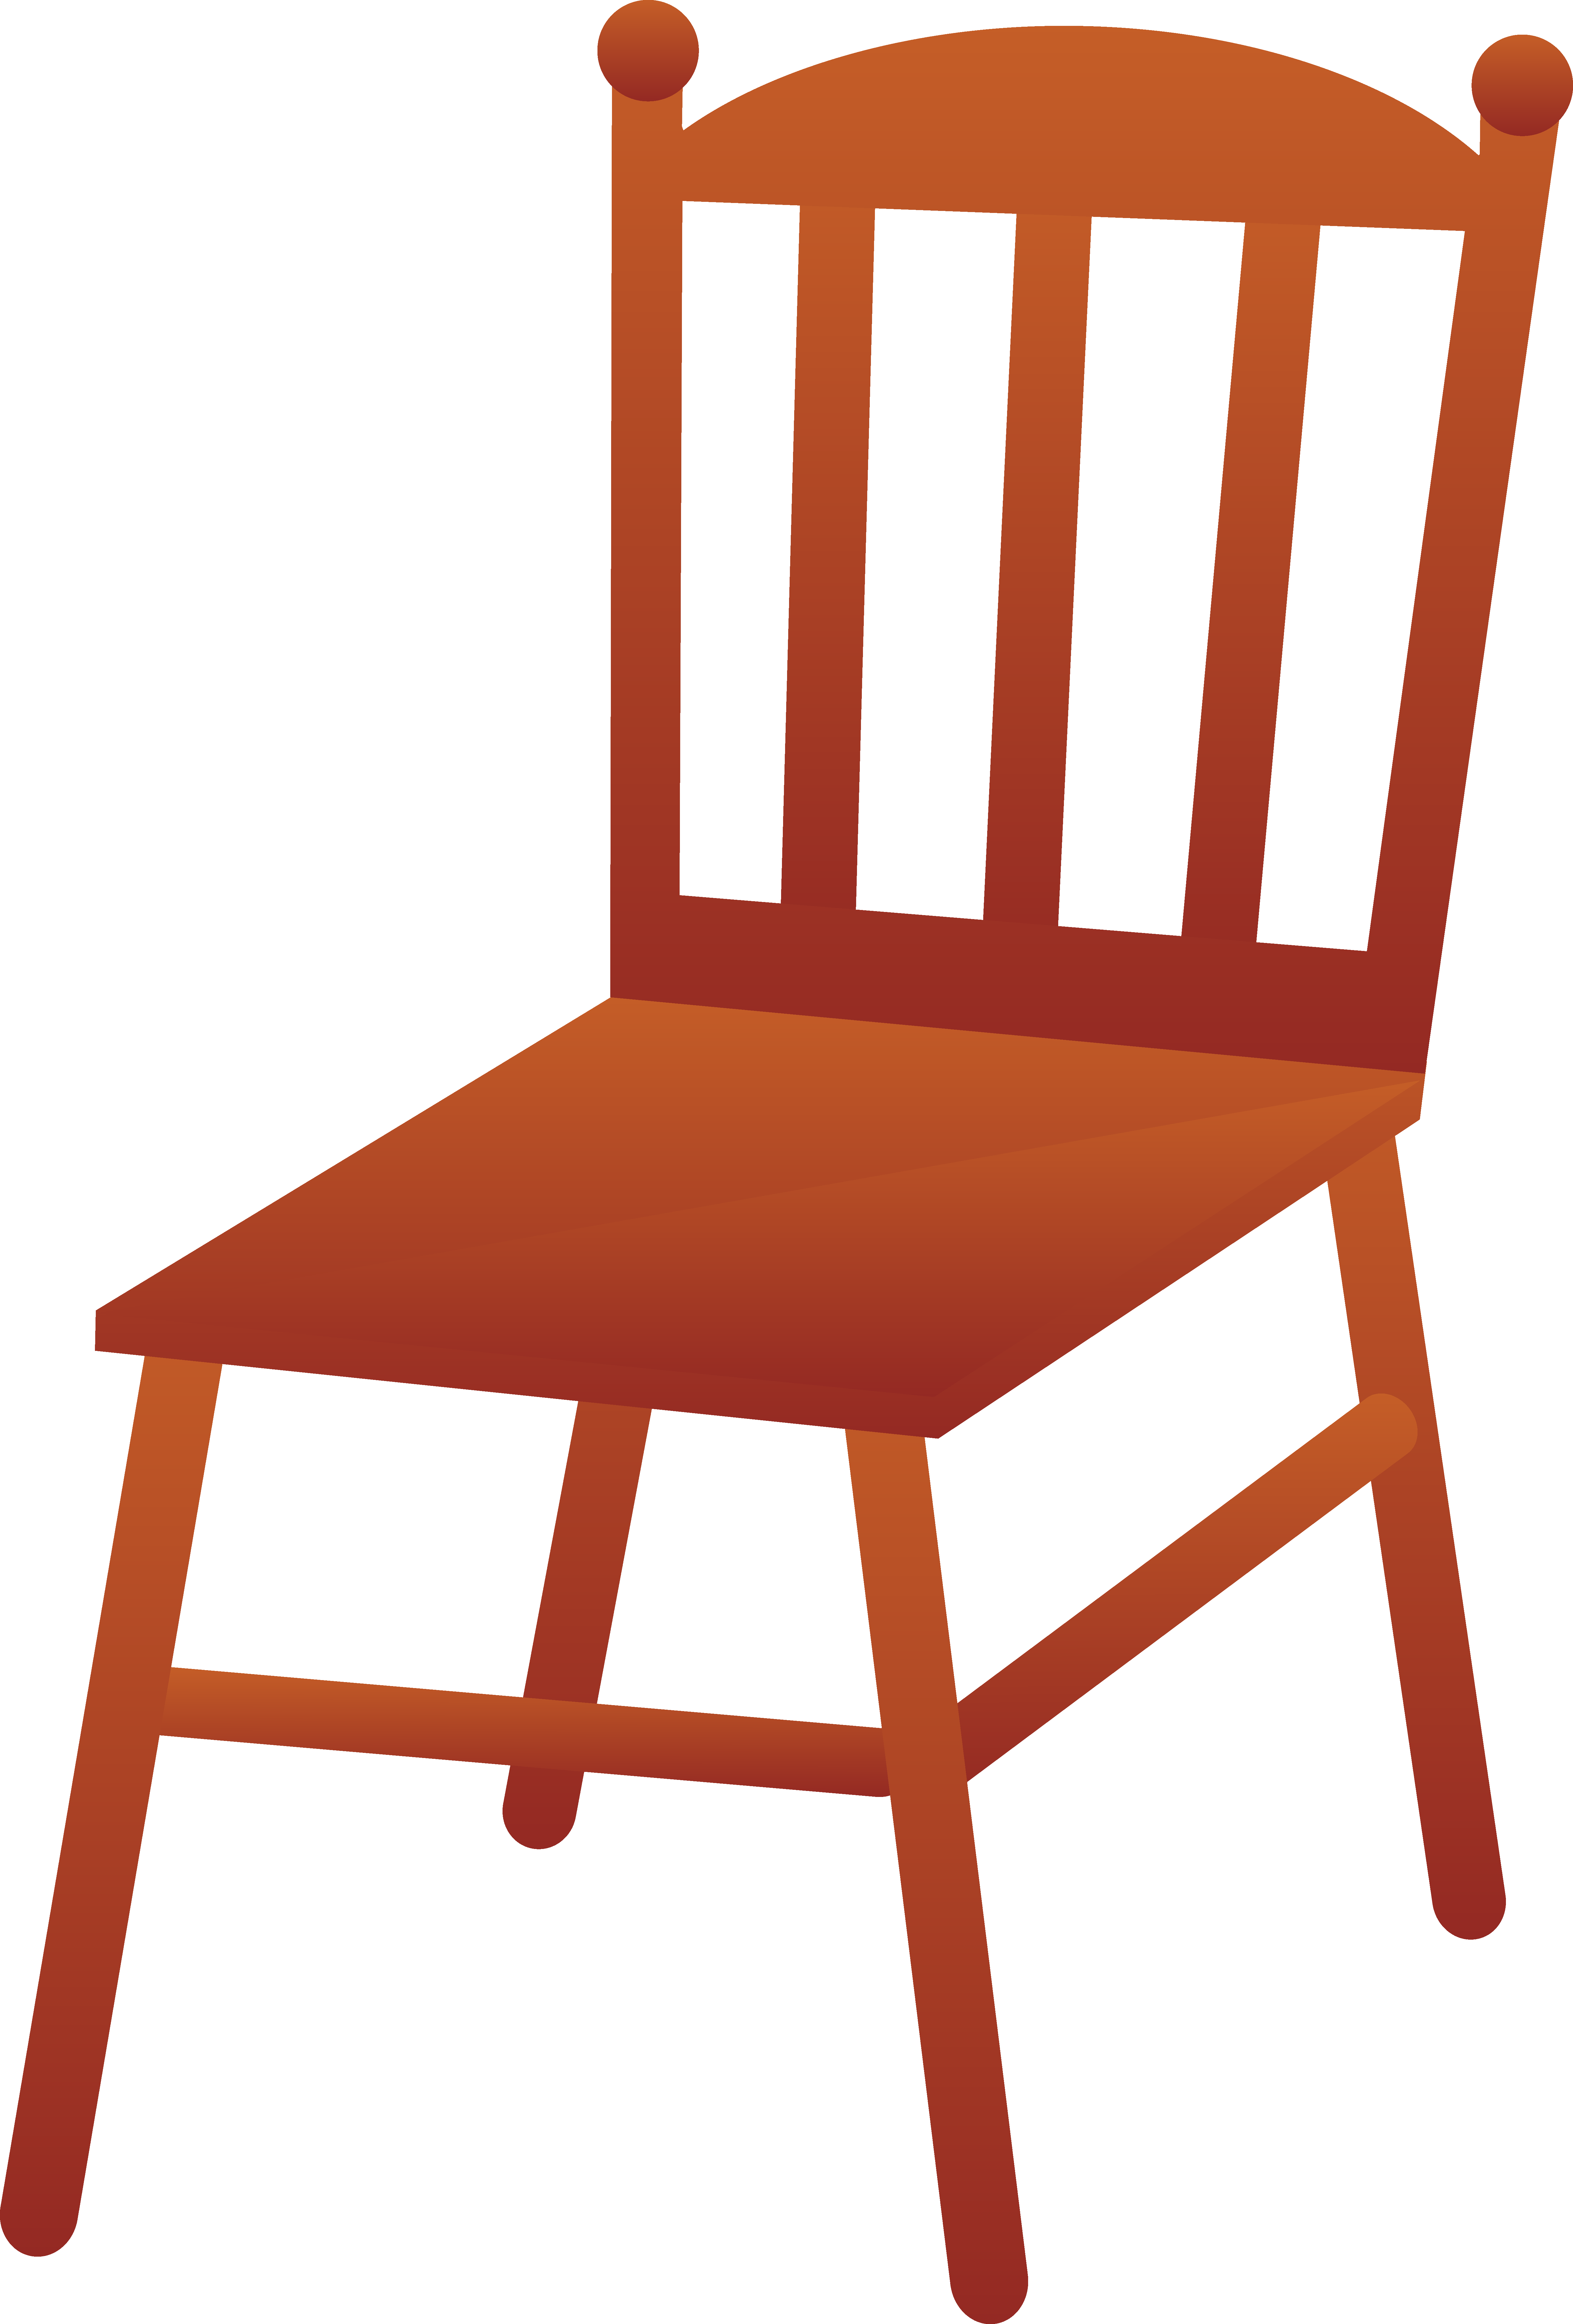 clipart pictures of furniture - photo #42